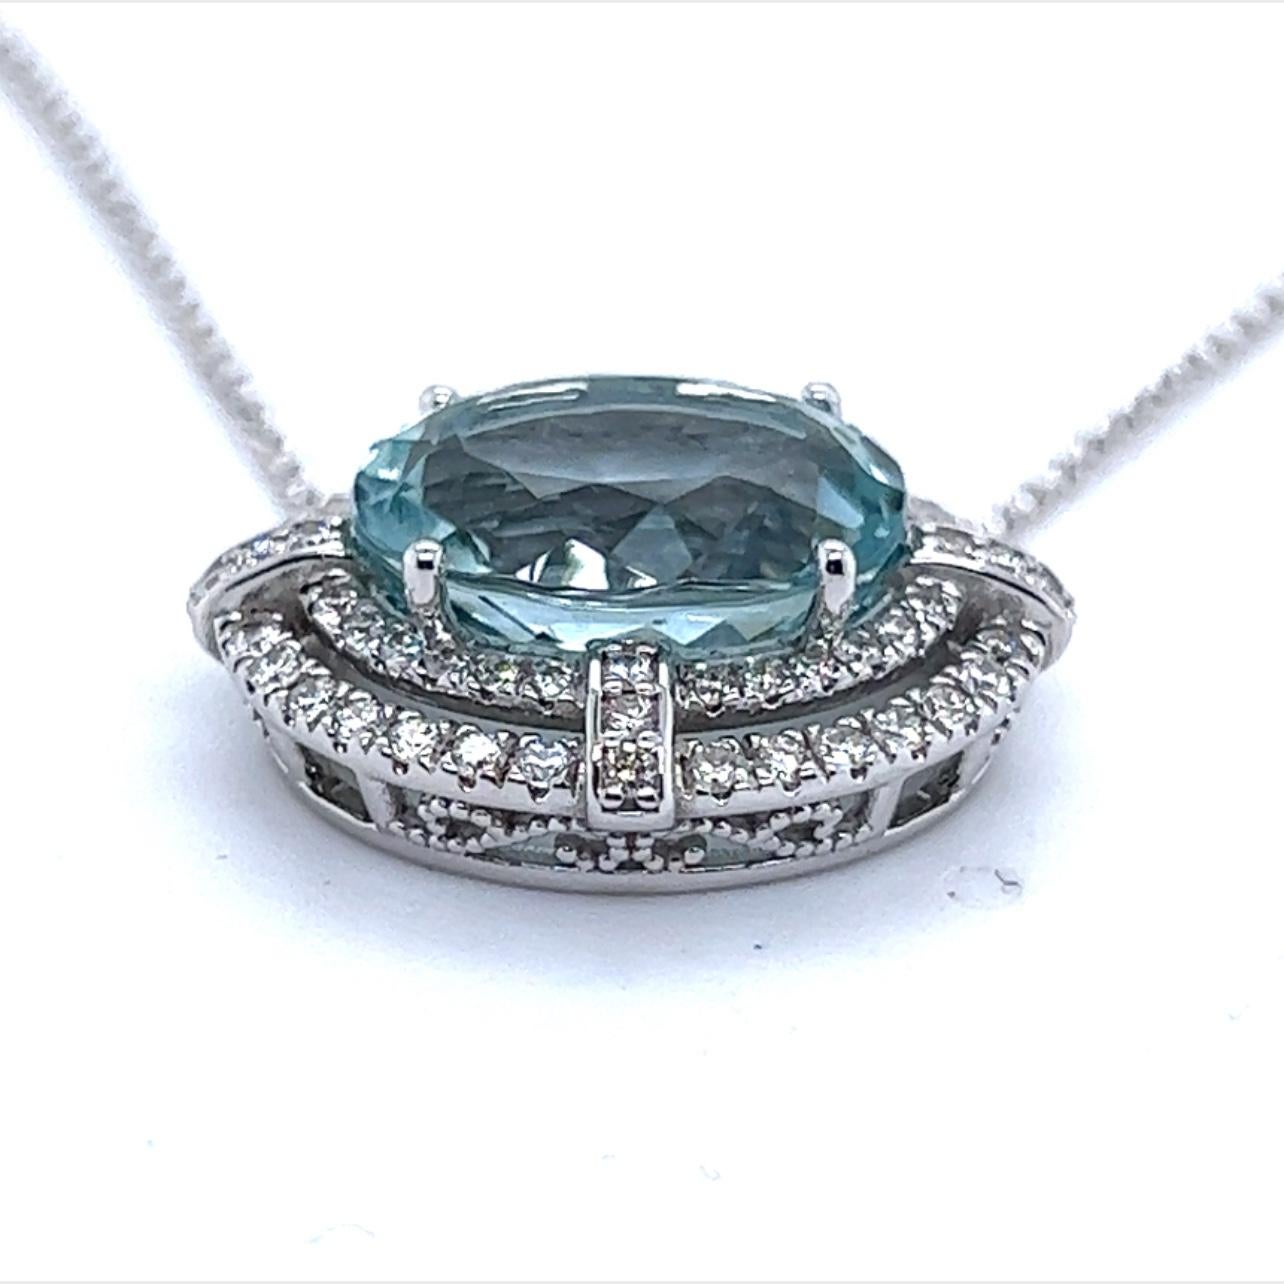 Oval Cut Natural Aquamarine Diamond Pendant With Chain 14k Gold 7.09 TCW Certified For Sale